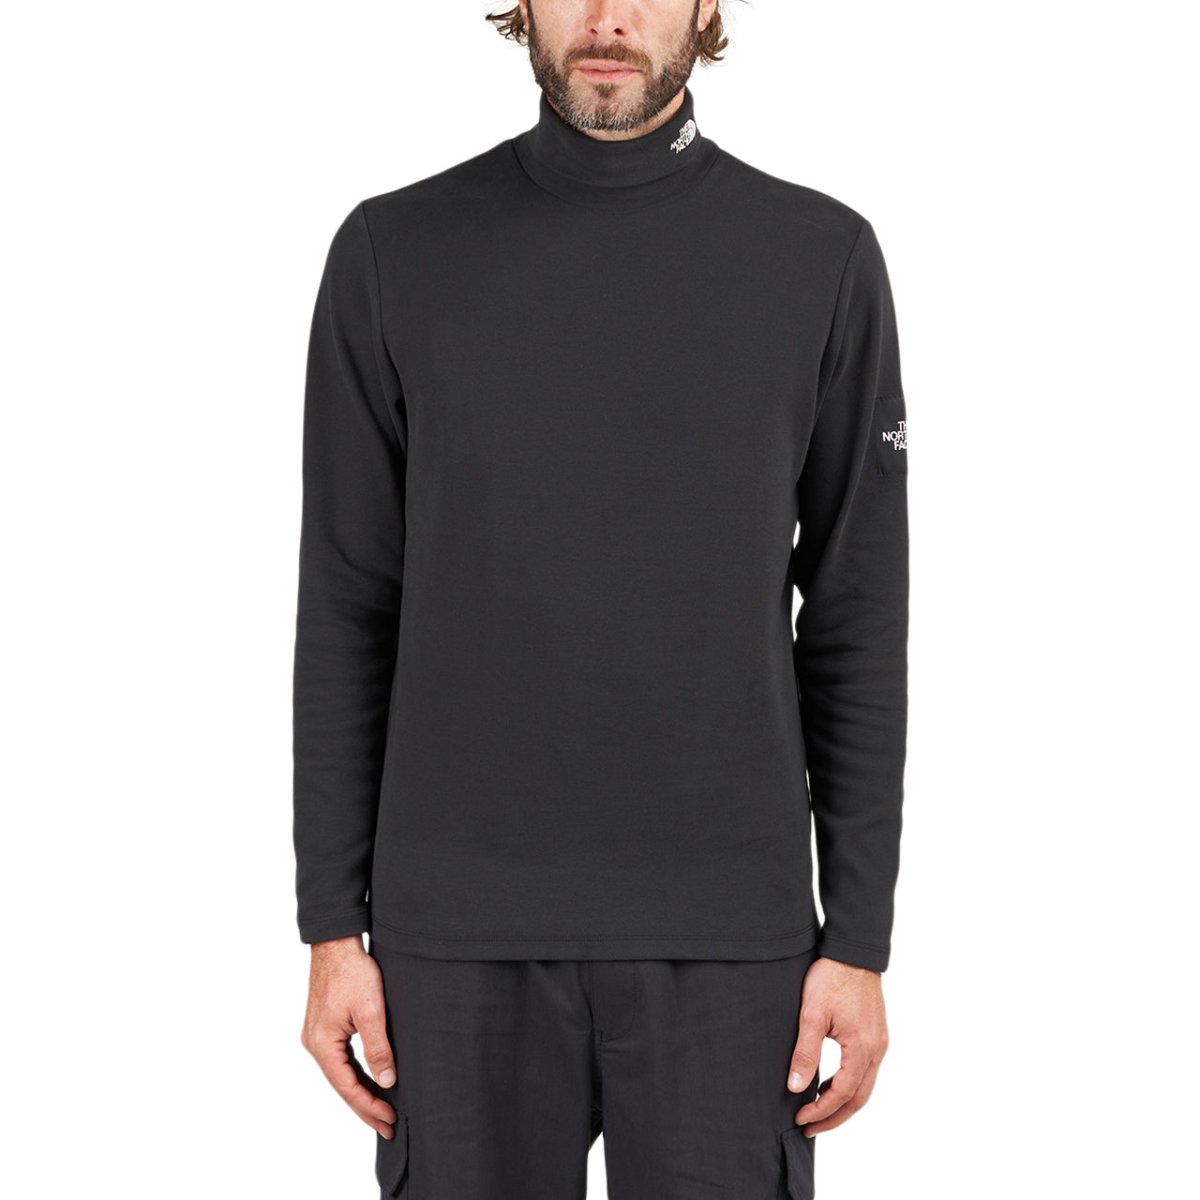 Image of The North Face BB Lst Dnc Longsleeve (Black)